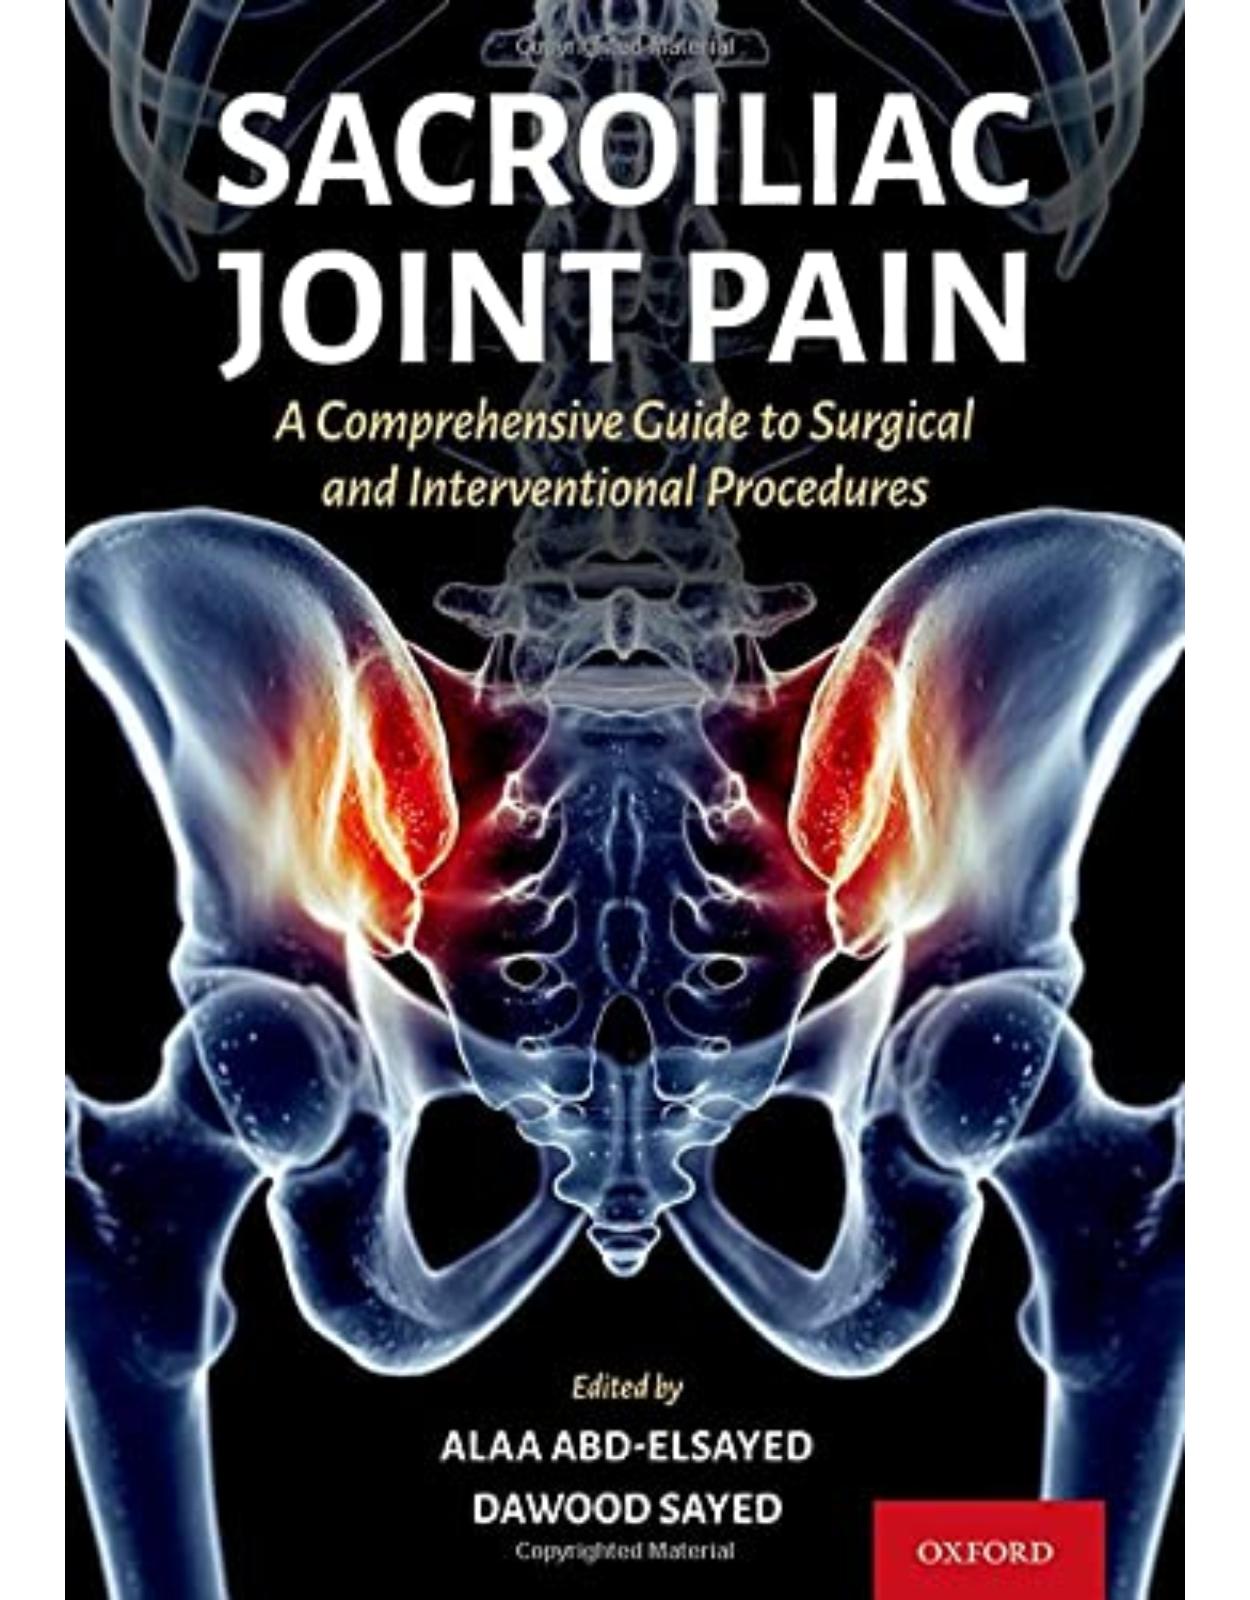 Sacroiliac Joint Pain: A Comprehensive Guide to Interventional and Surgical Procedures 